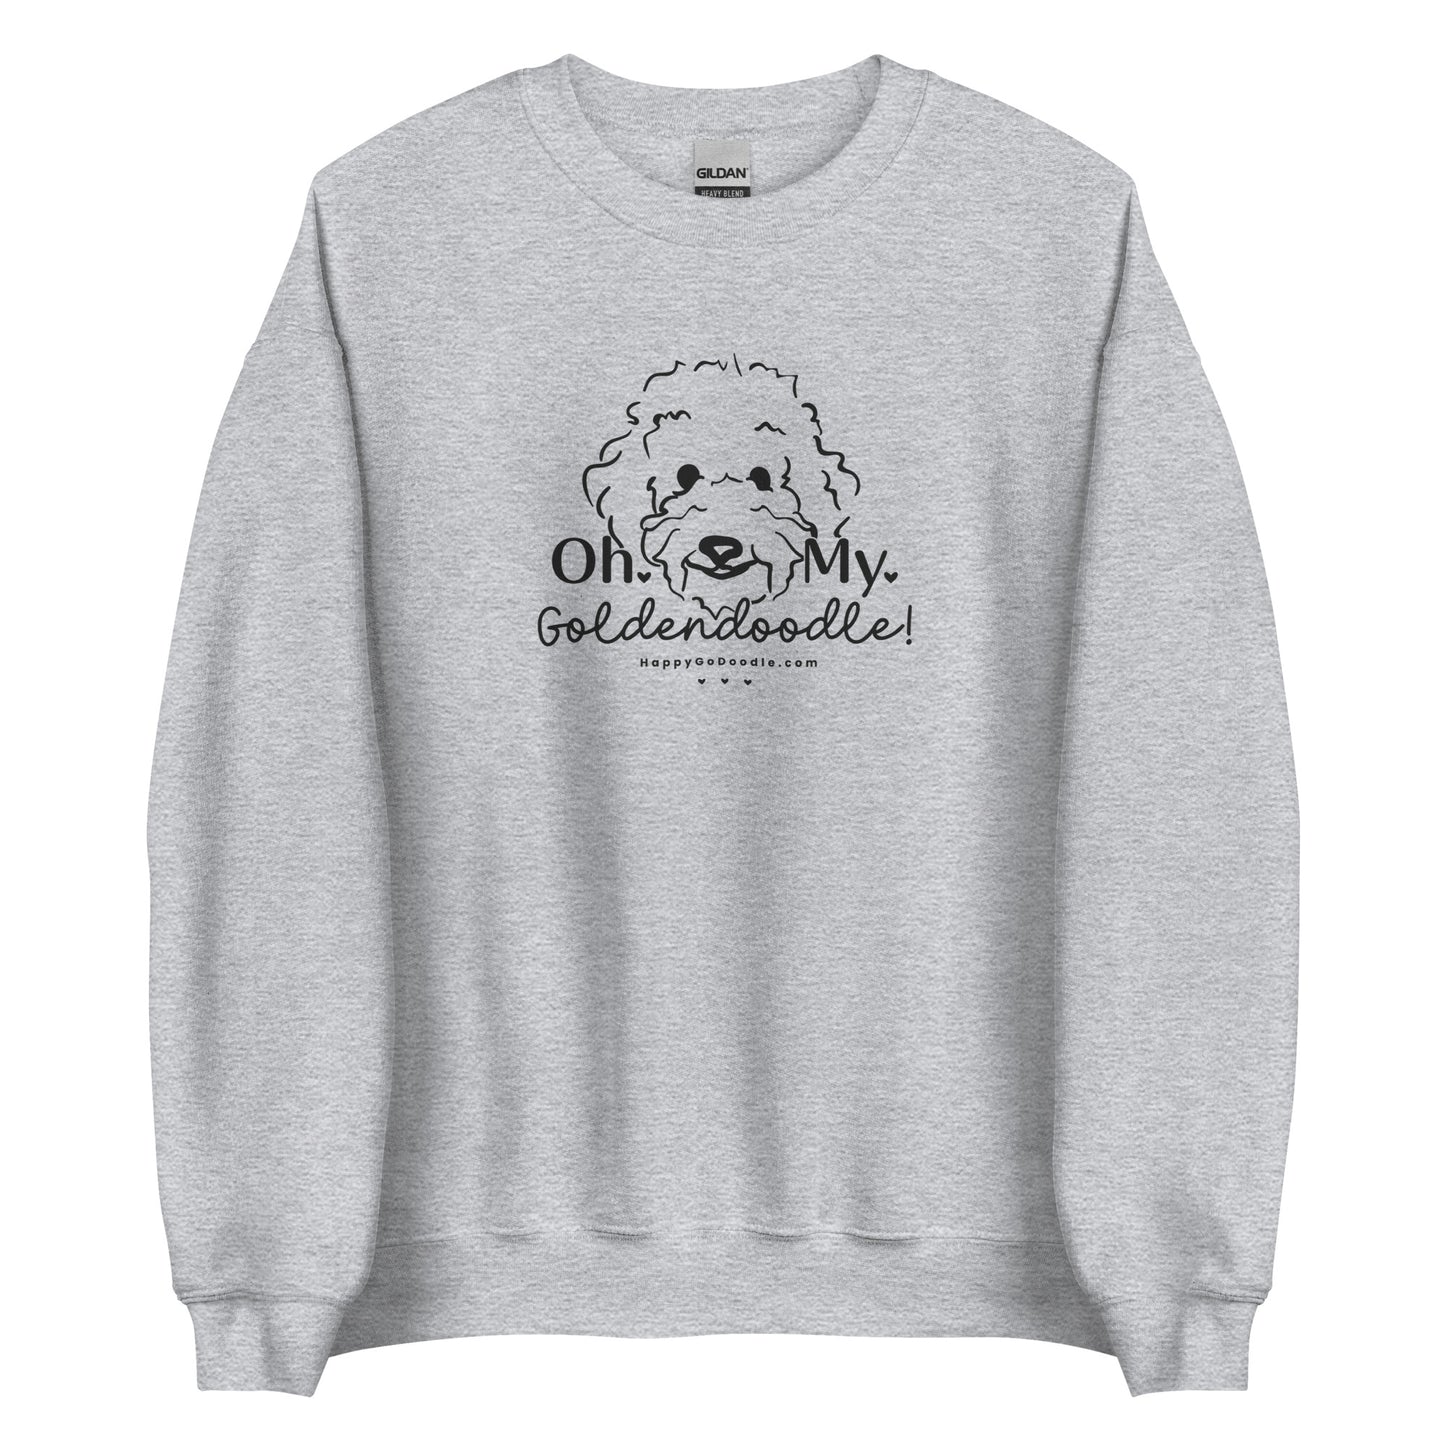 Goldendoodle crew neck sweatshirt with Goldendoodle face and words "Oh My Goldendoodle" in sport grey color